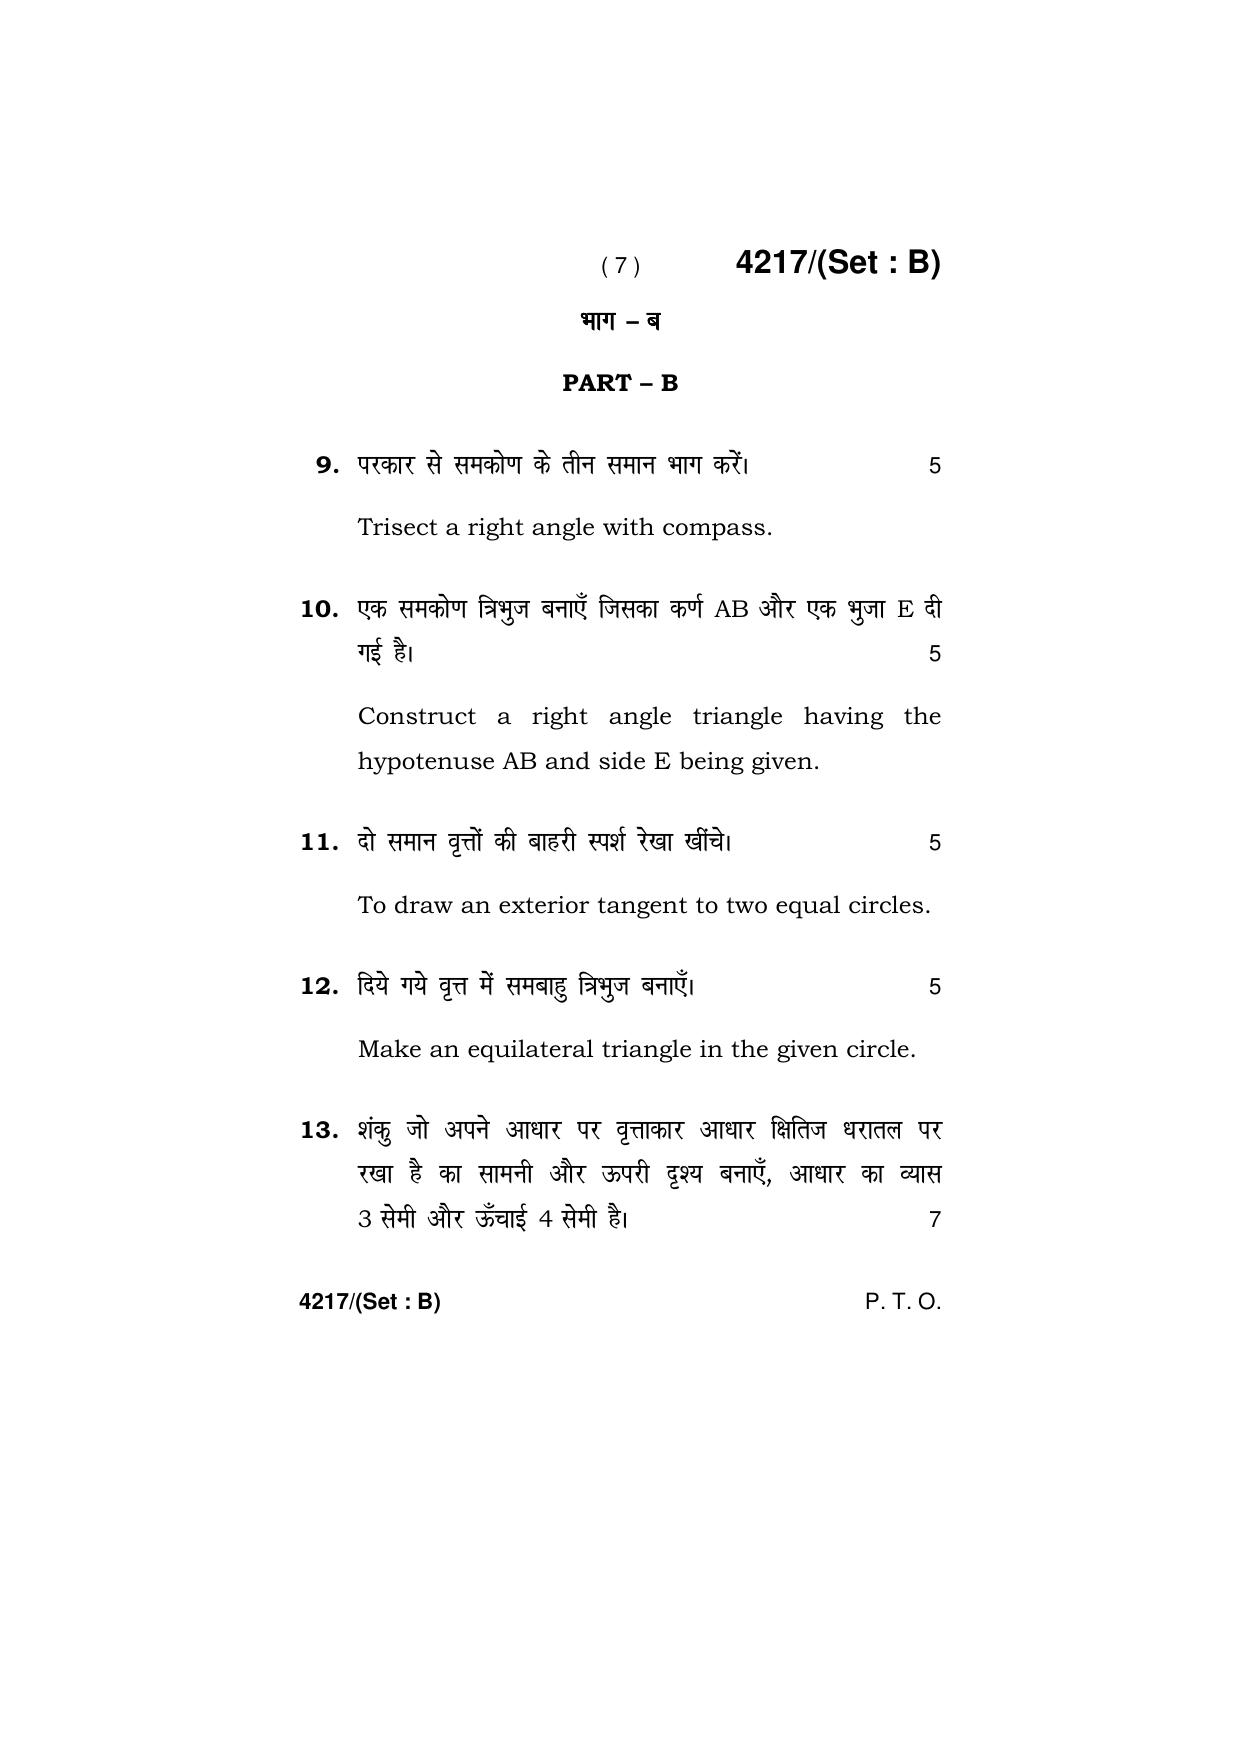 Haryana Board HBSE Class 10 Drawing (All Set) 2019 Question Paper - Page 15